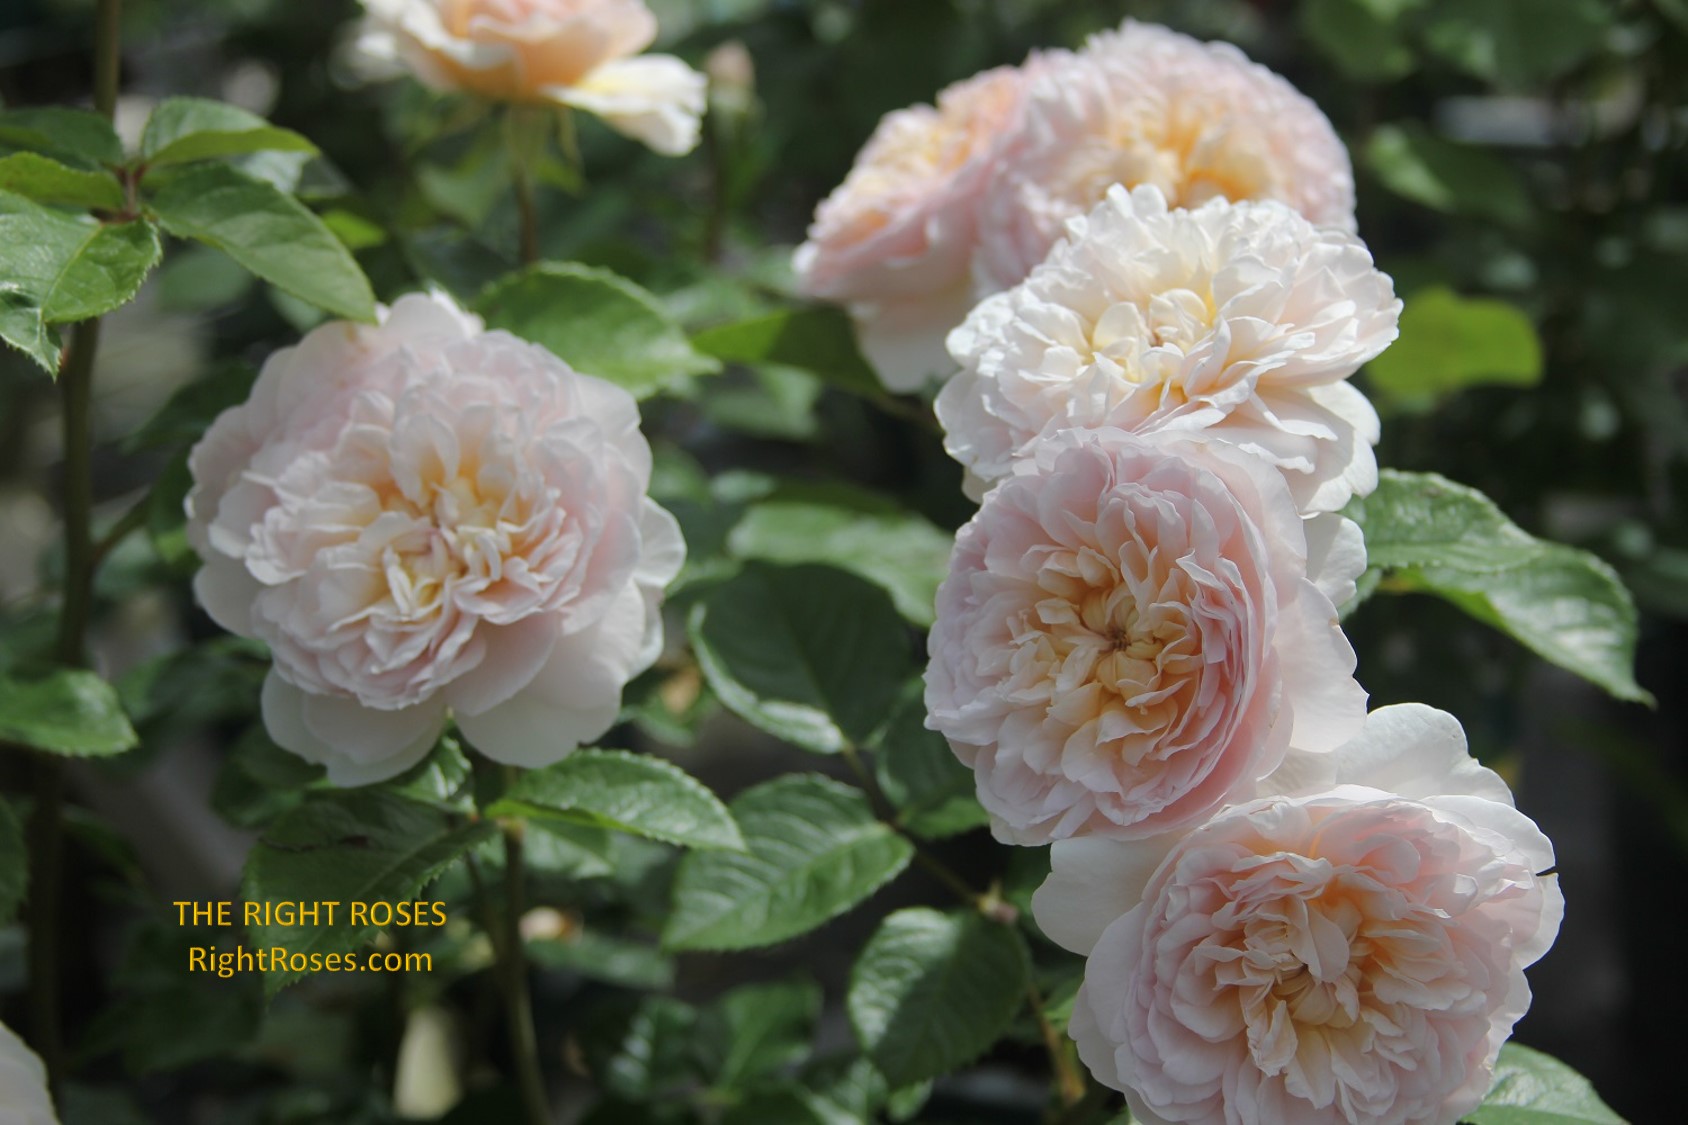 emily bronte rose review the right roses score best top garden store david austin english roses rose products rose rating